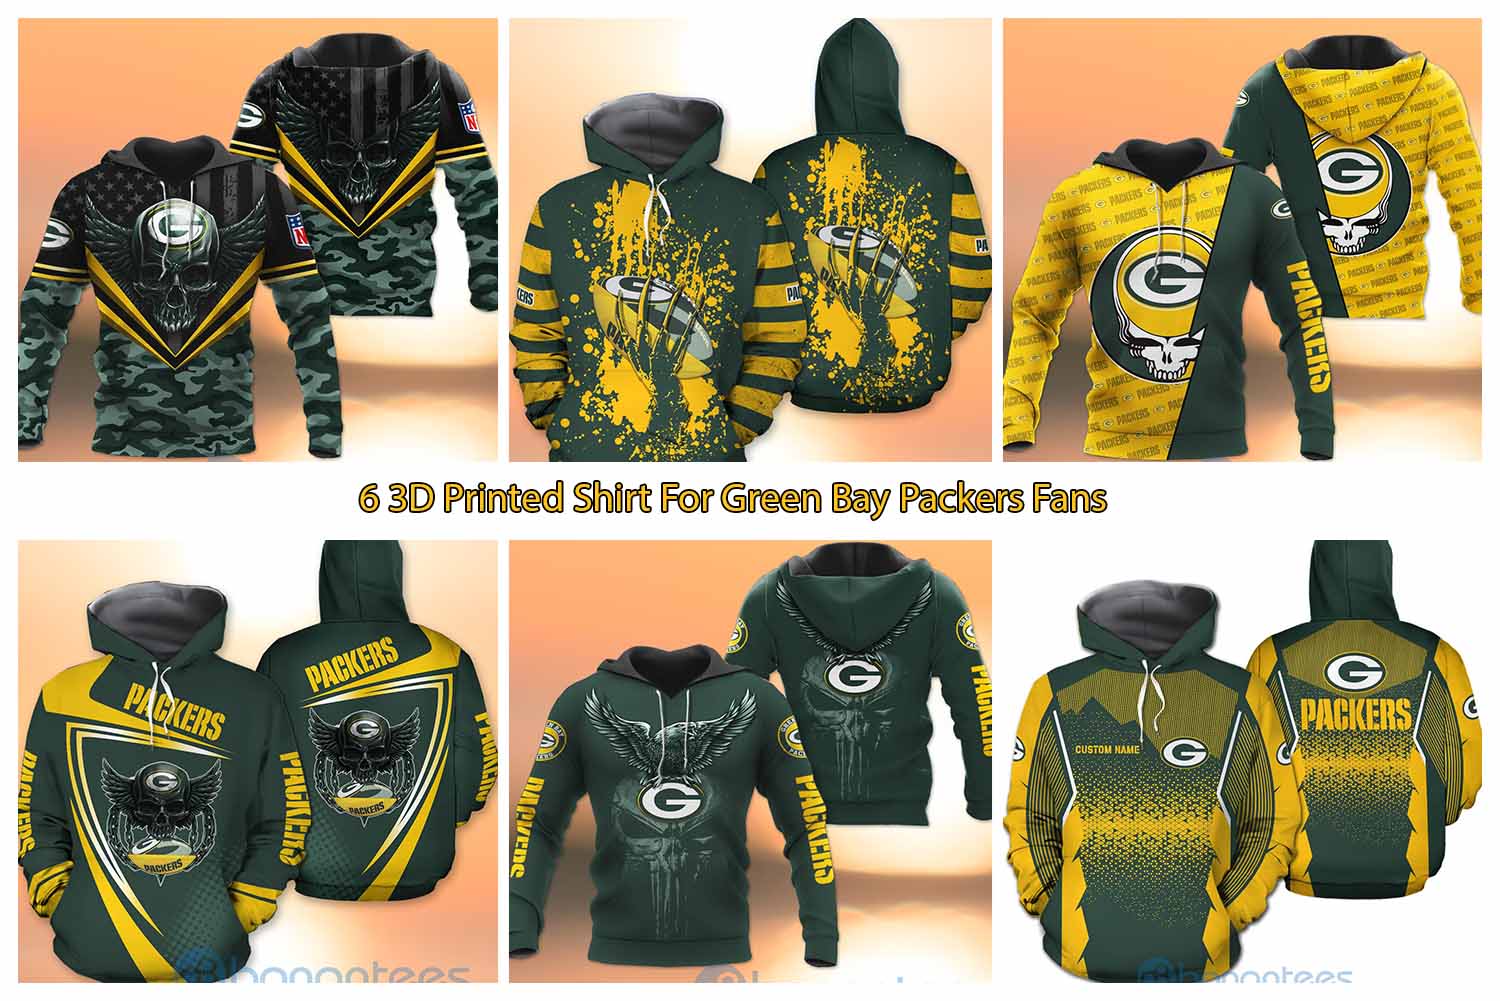 6 3D Printed Shirt For Green Bay Packers Fans